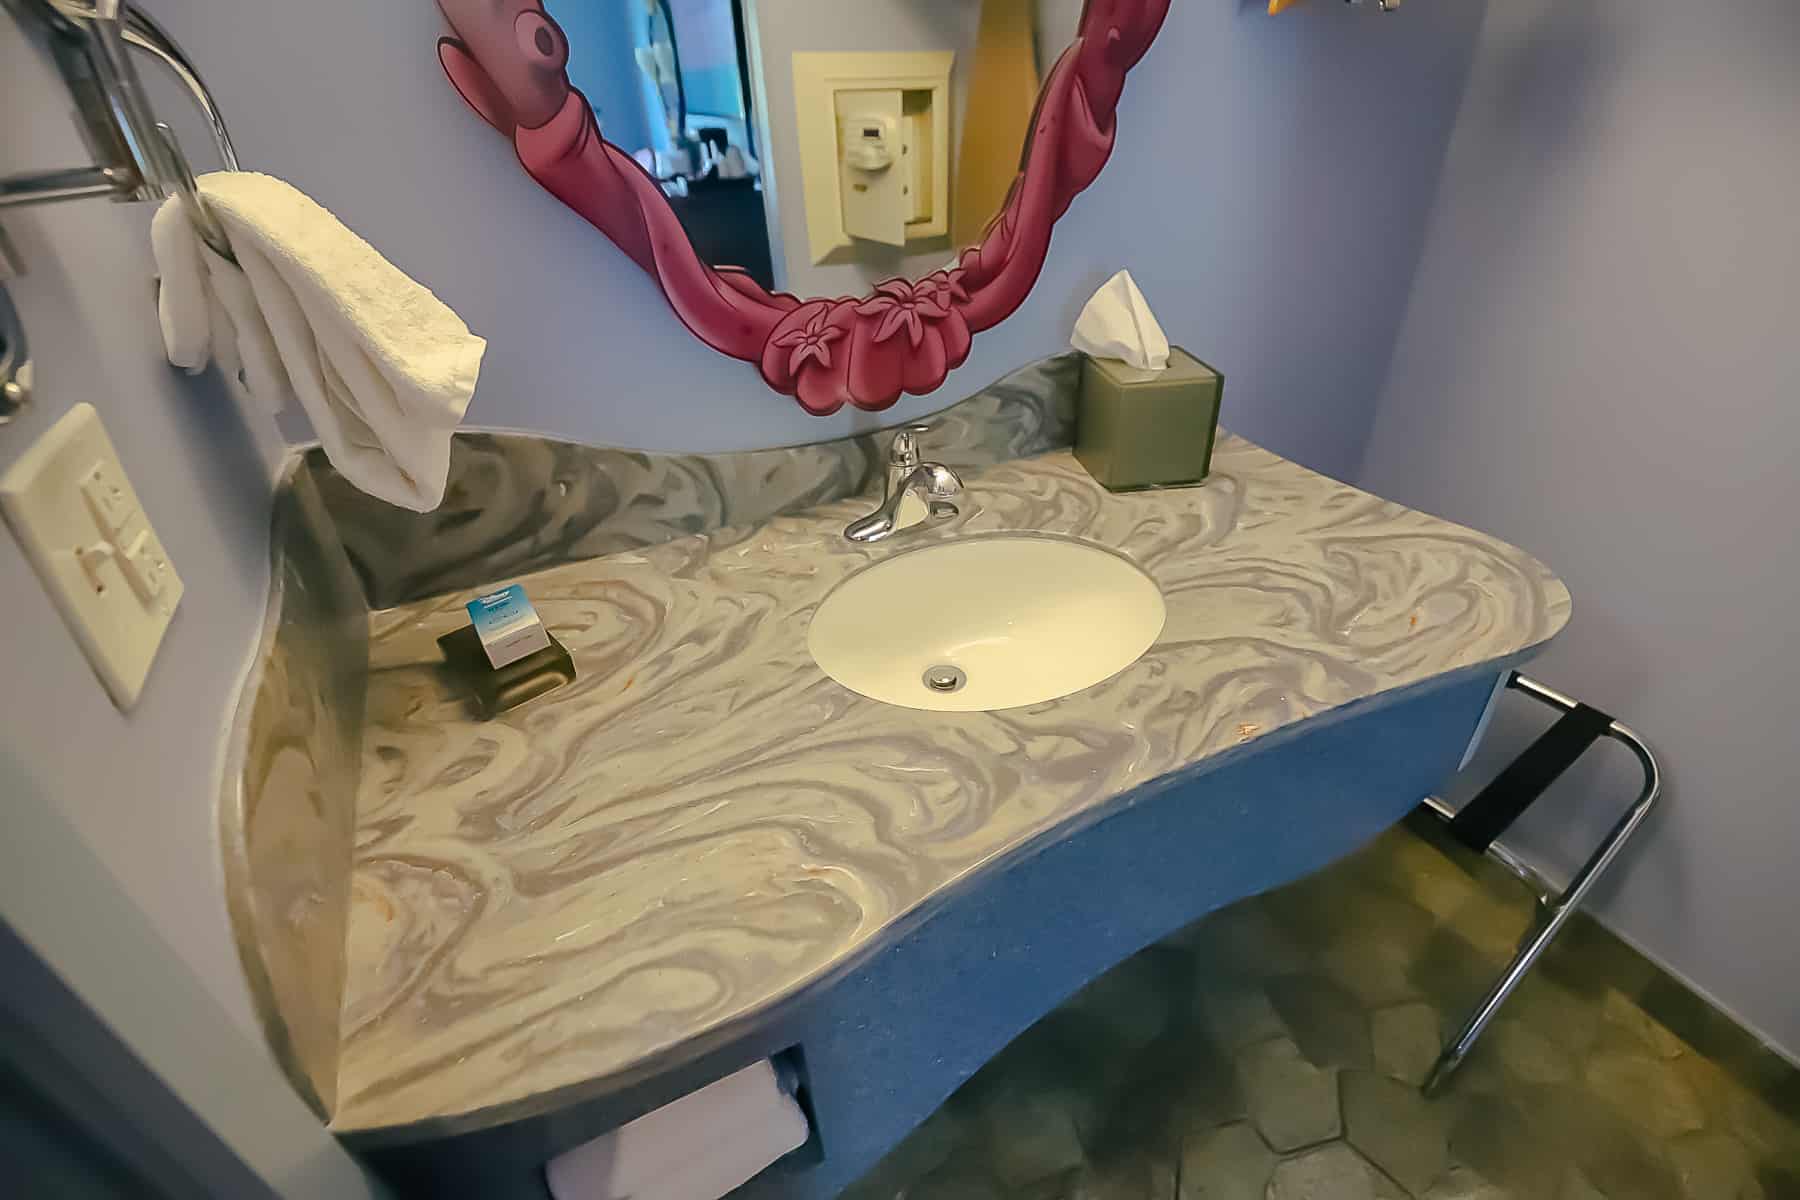 Rooms in The Little Mermaid section of Art of Animation have one sink. 